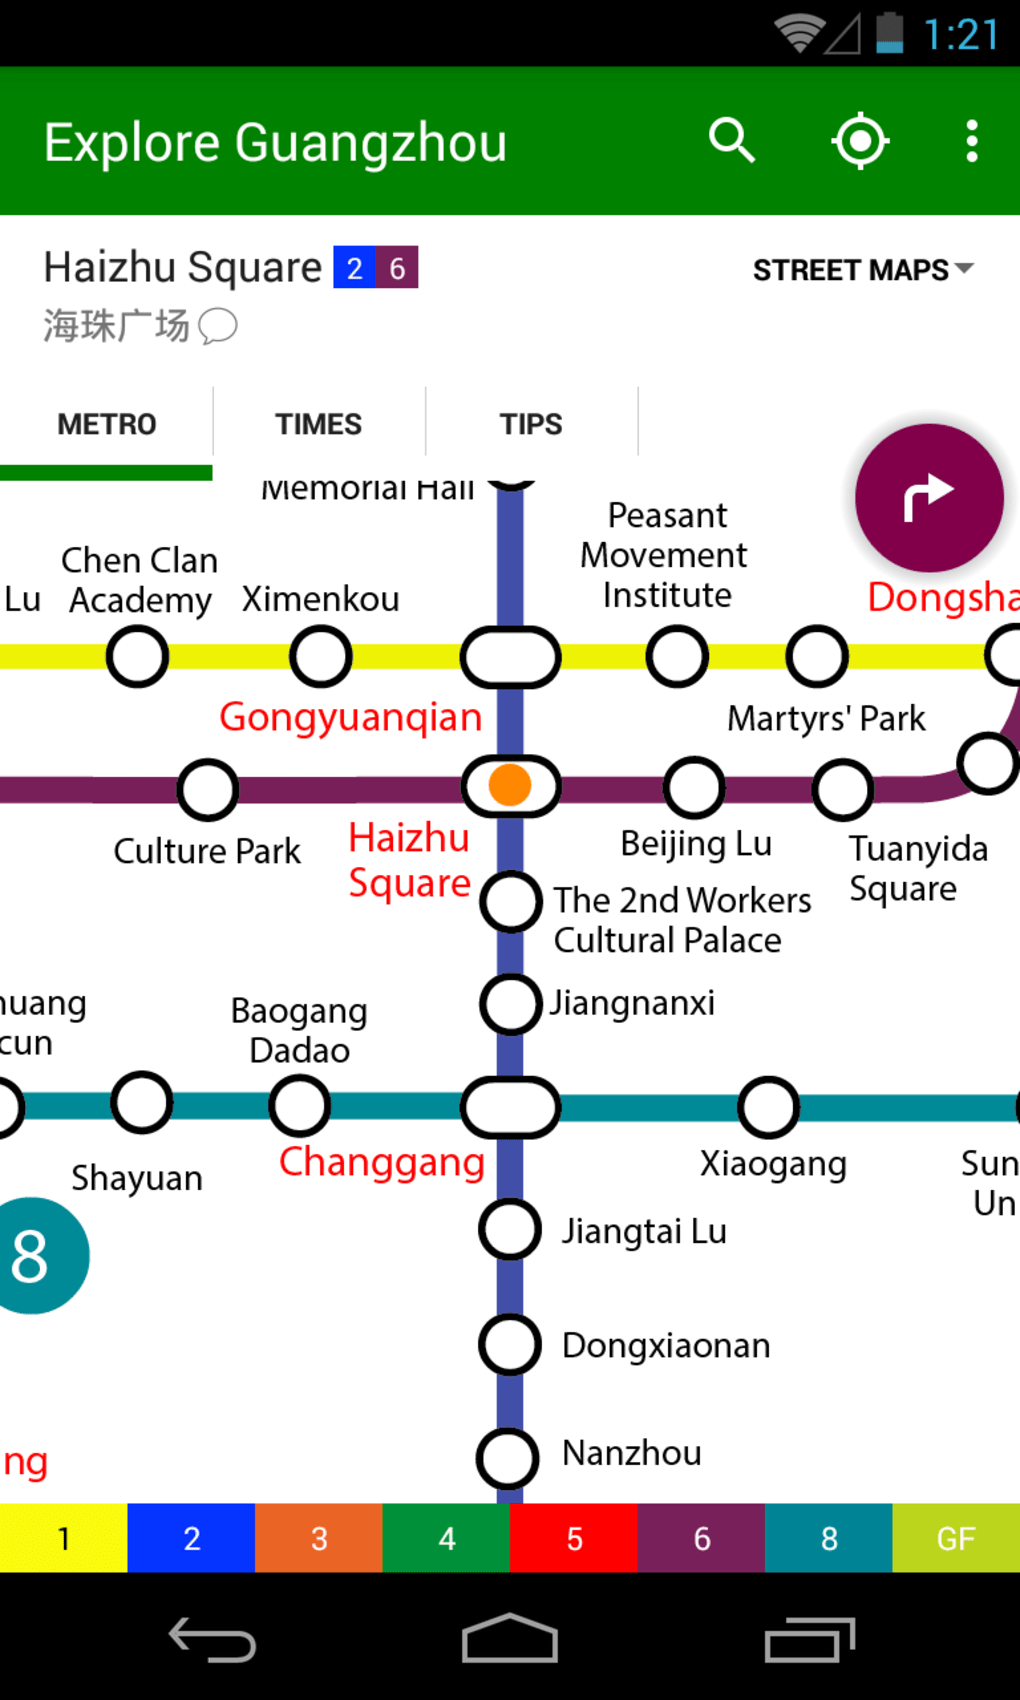 Explore Guangzhou metro map APK لنظام Android - تنزيل